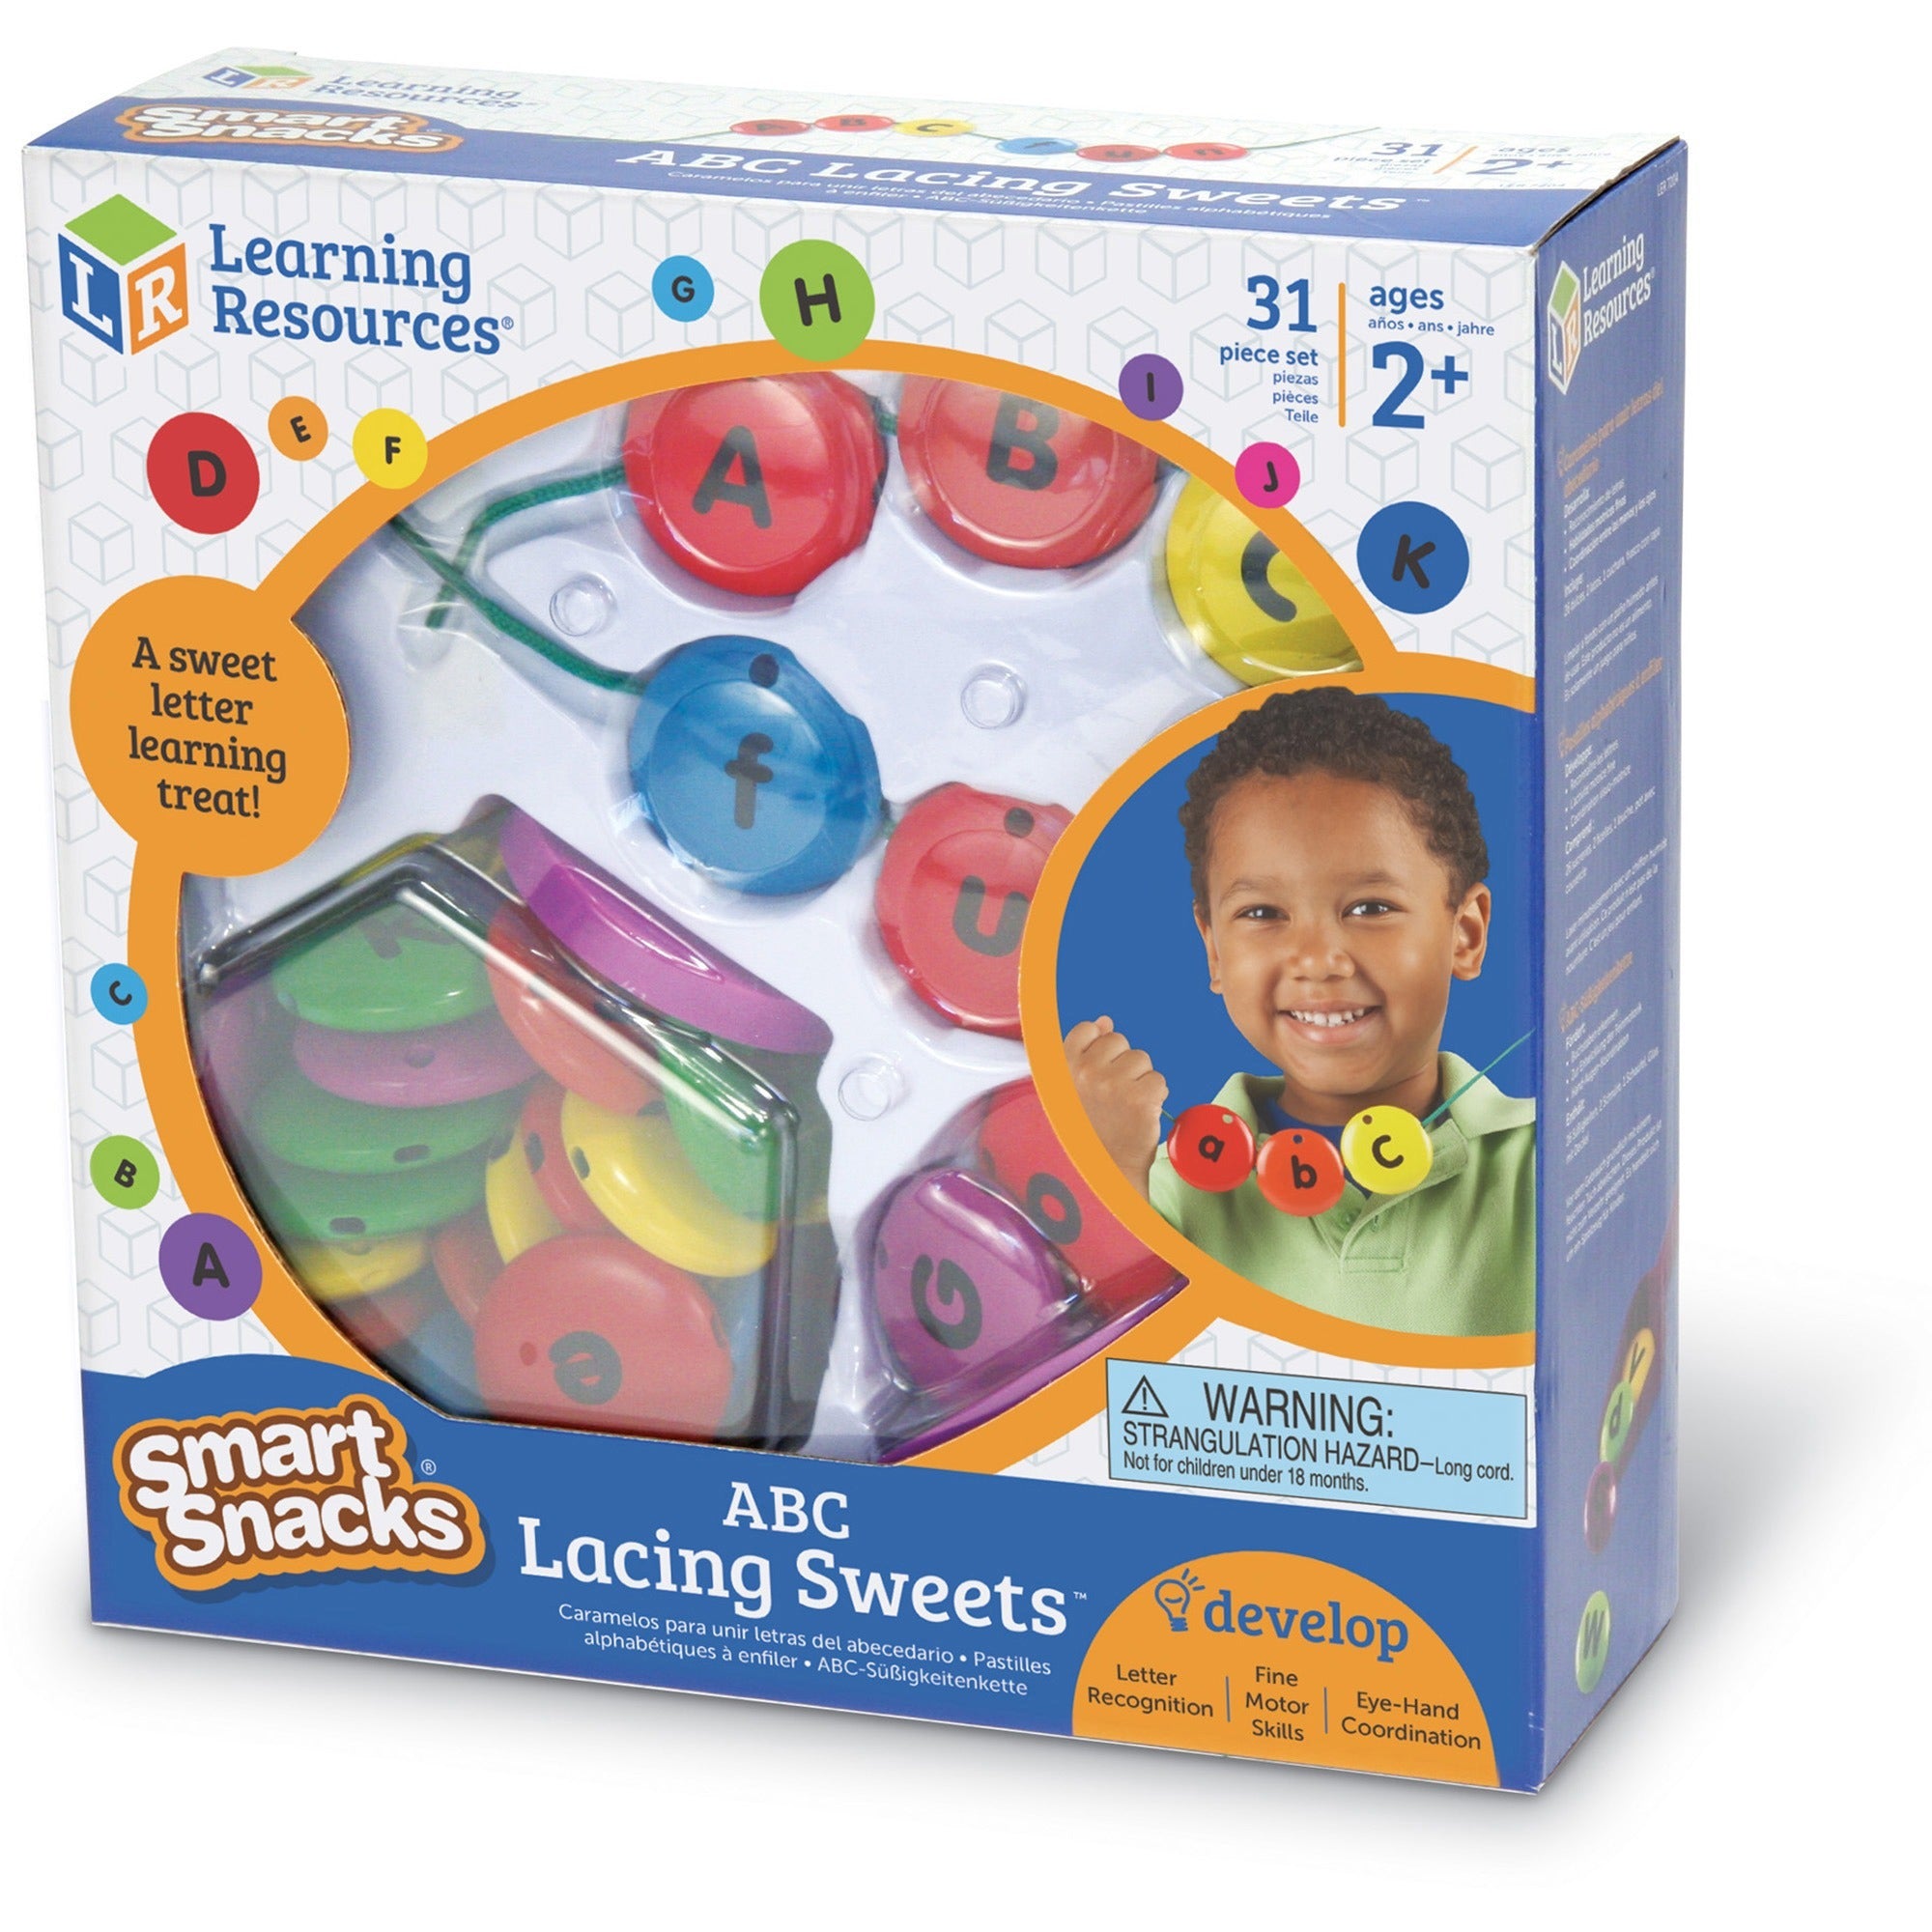 Smart Snacks ABC Lacing Sweets - Theme/Subject: Learning - Skill Learning: Eye-hand Coordination, Spelling, Fine Motor, Letter Recognition, Word Building, Creativity, Imagination, Sequencing, Alphabet - 2-5 Year - 31 Pieces - 